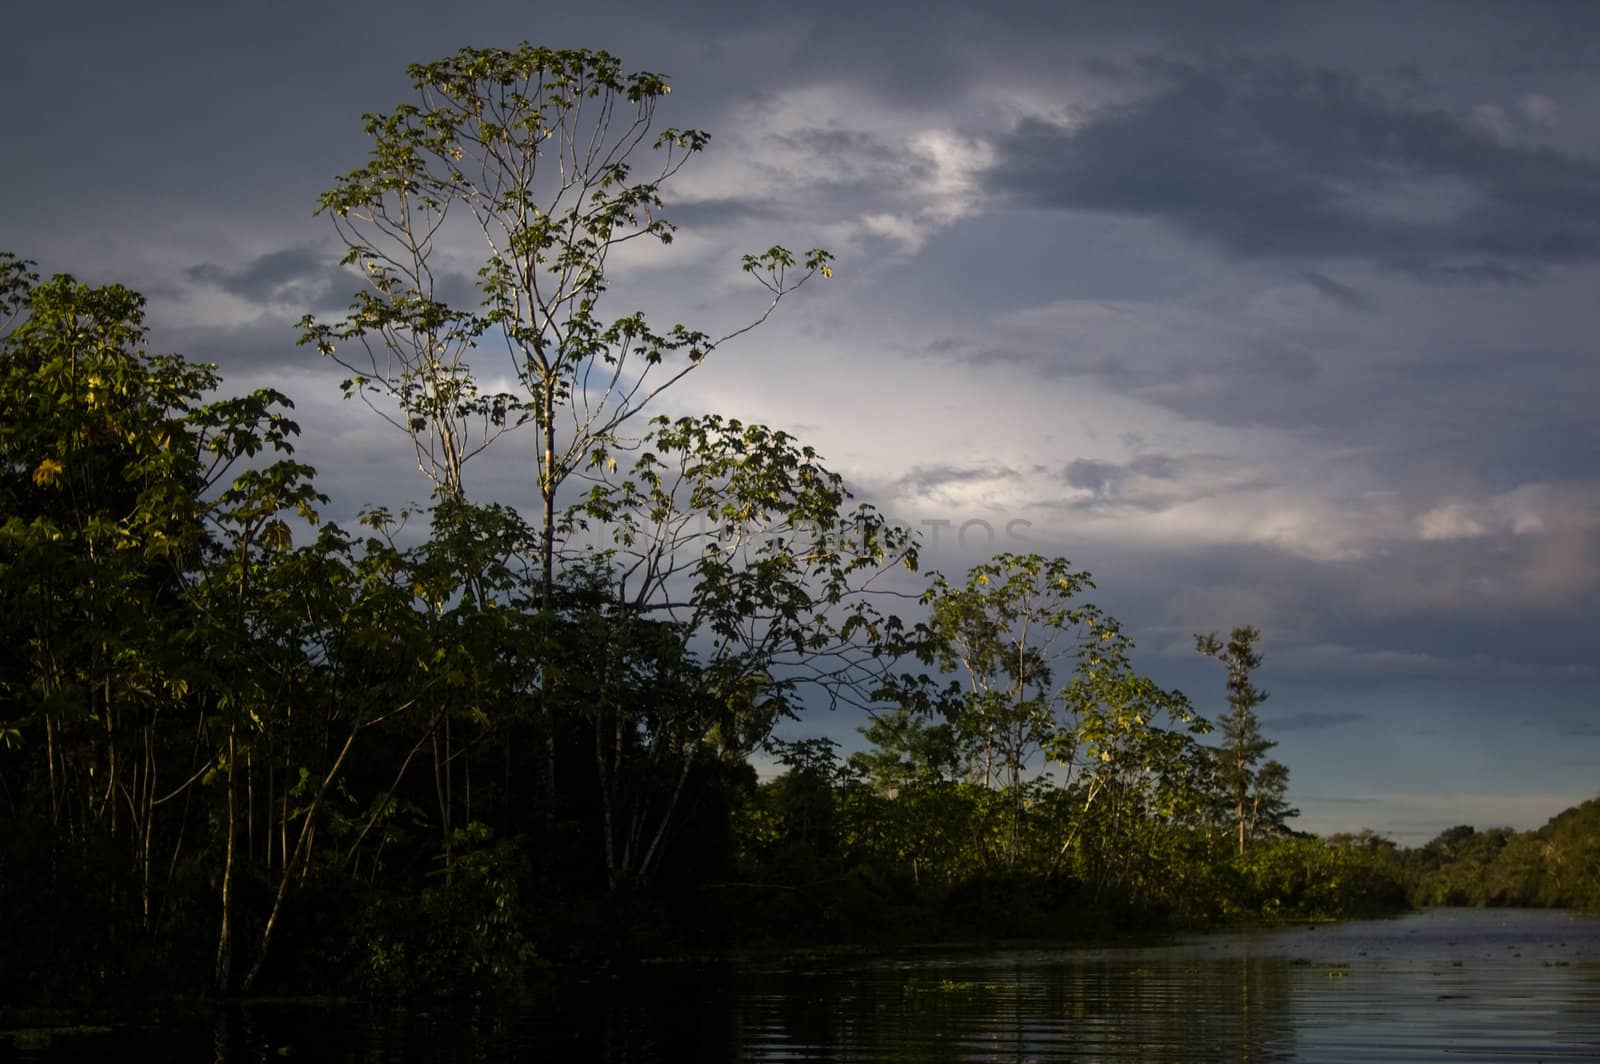 Stormy skies over the trees in the Amazon Rainforest